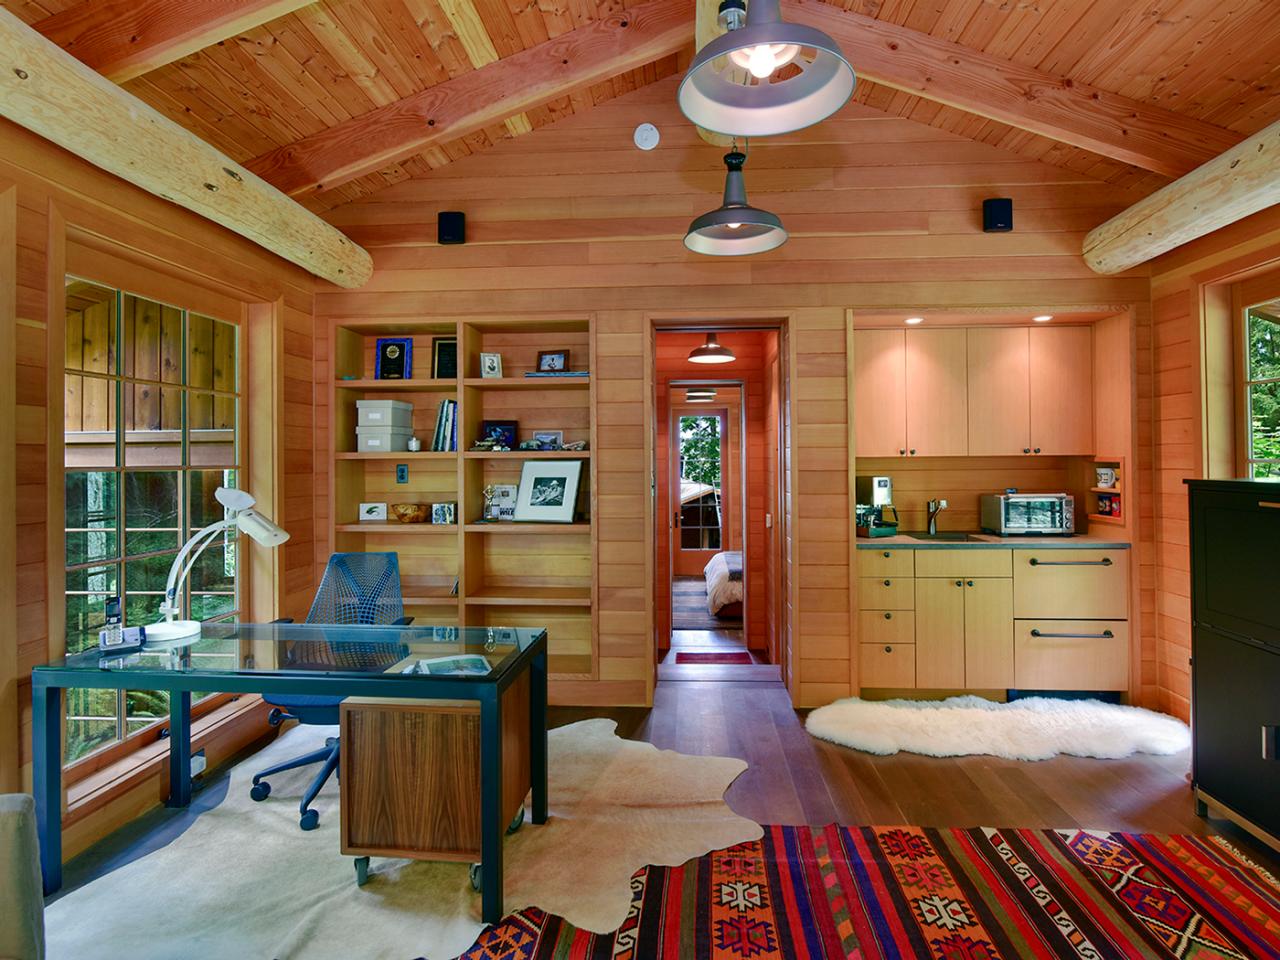 How to Decorate a Cabin, Cabin Home Decorating Ideas